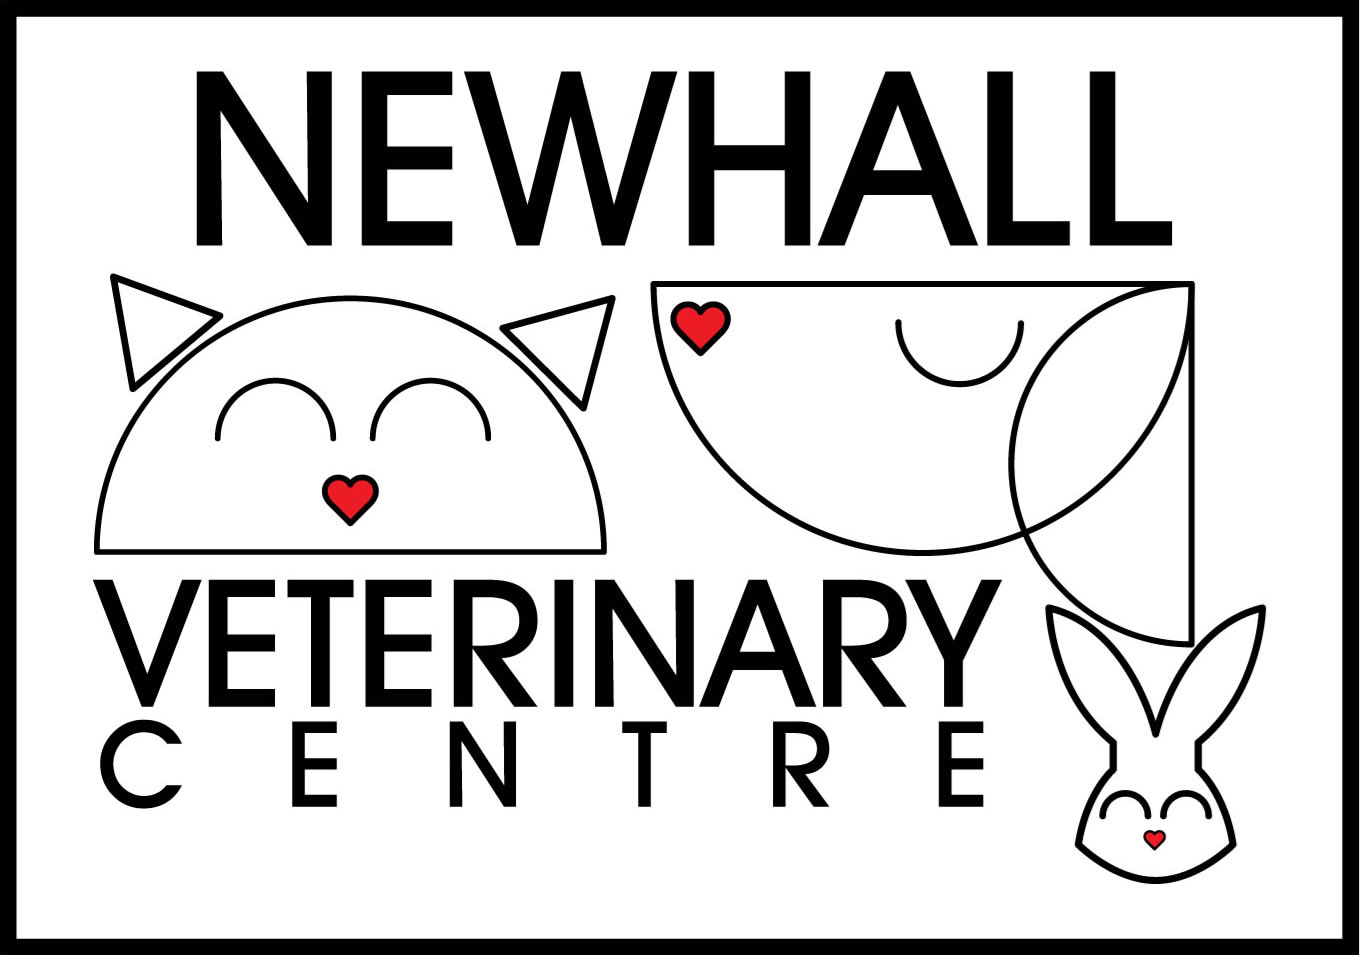 Newhall Veterinary Centre